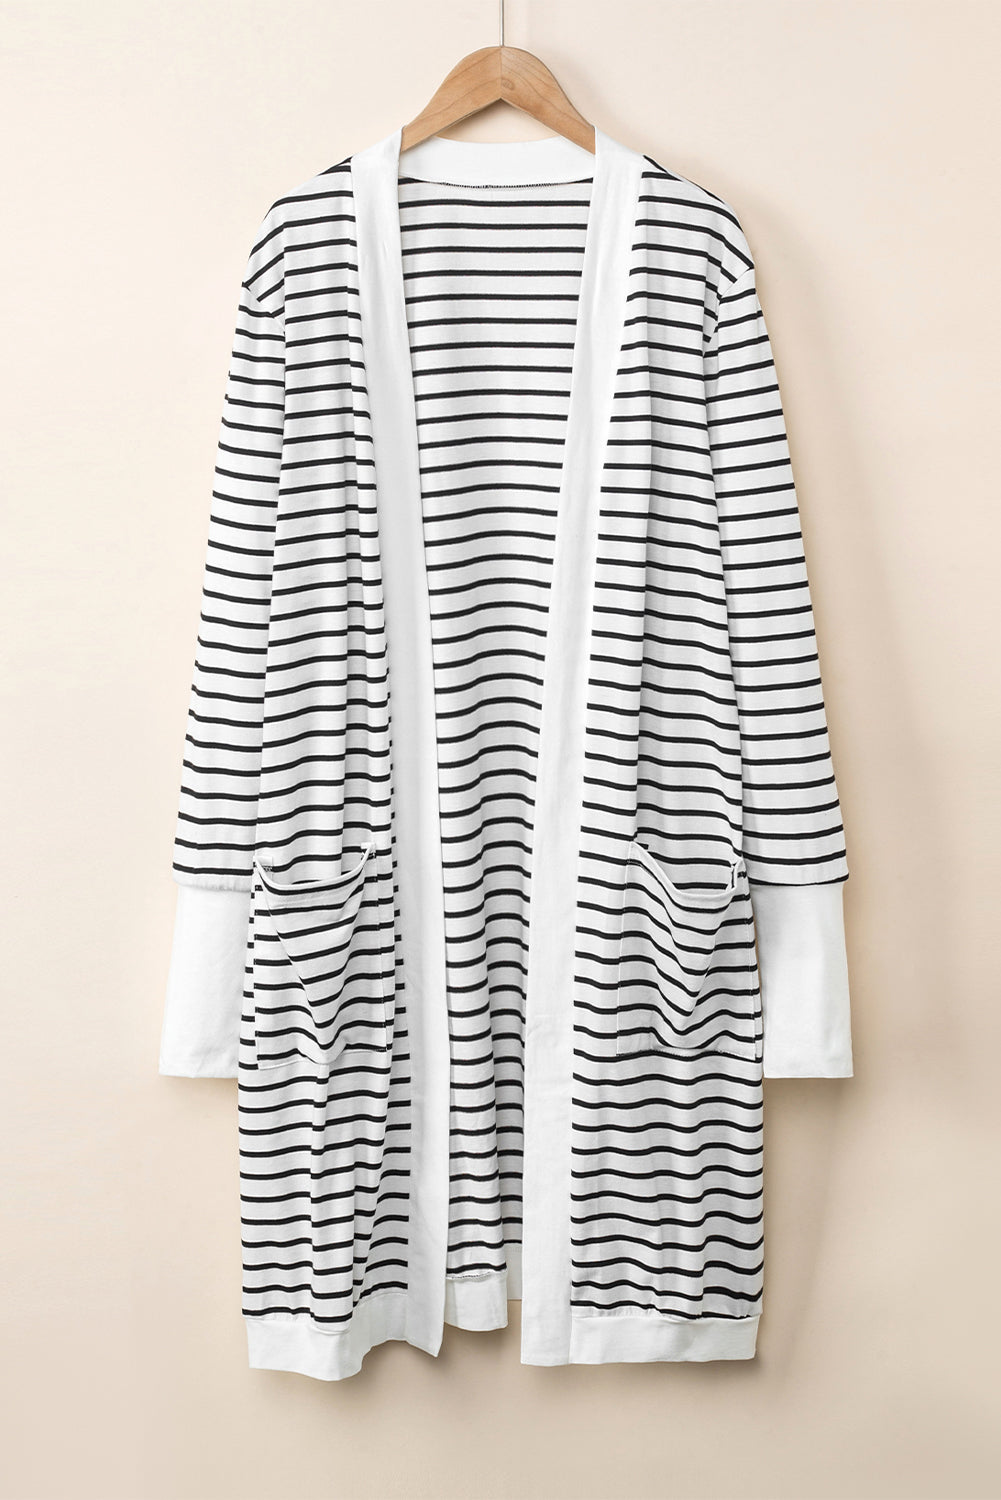 Brown Striped Side Pockets Open Front Cardigan